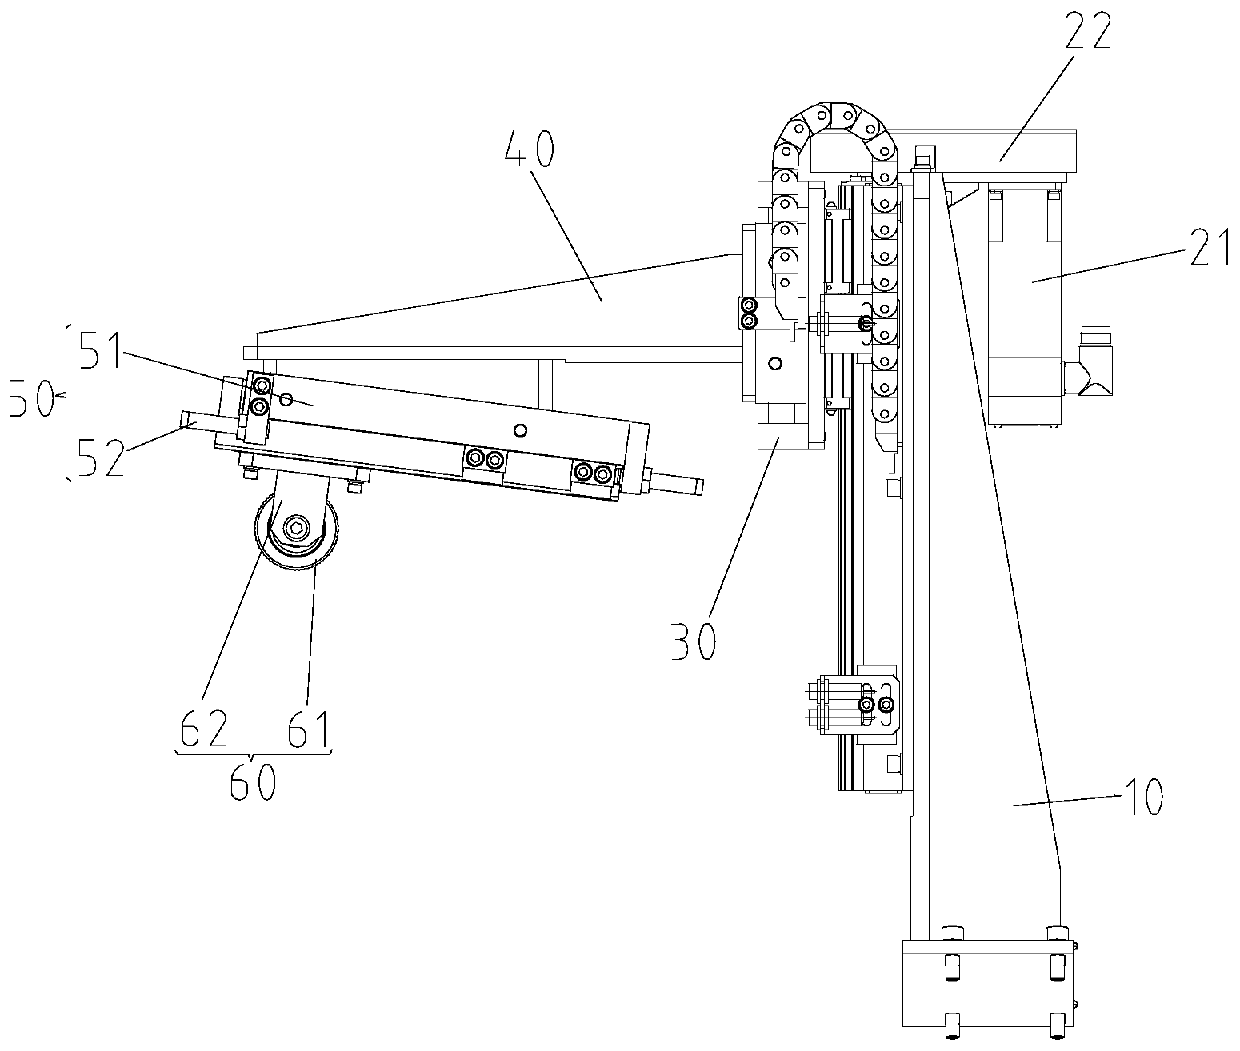 Bead filler joint stitching device